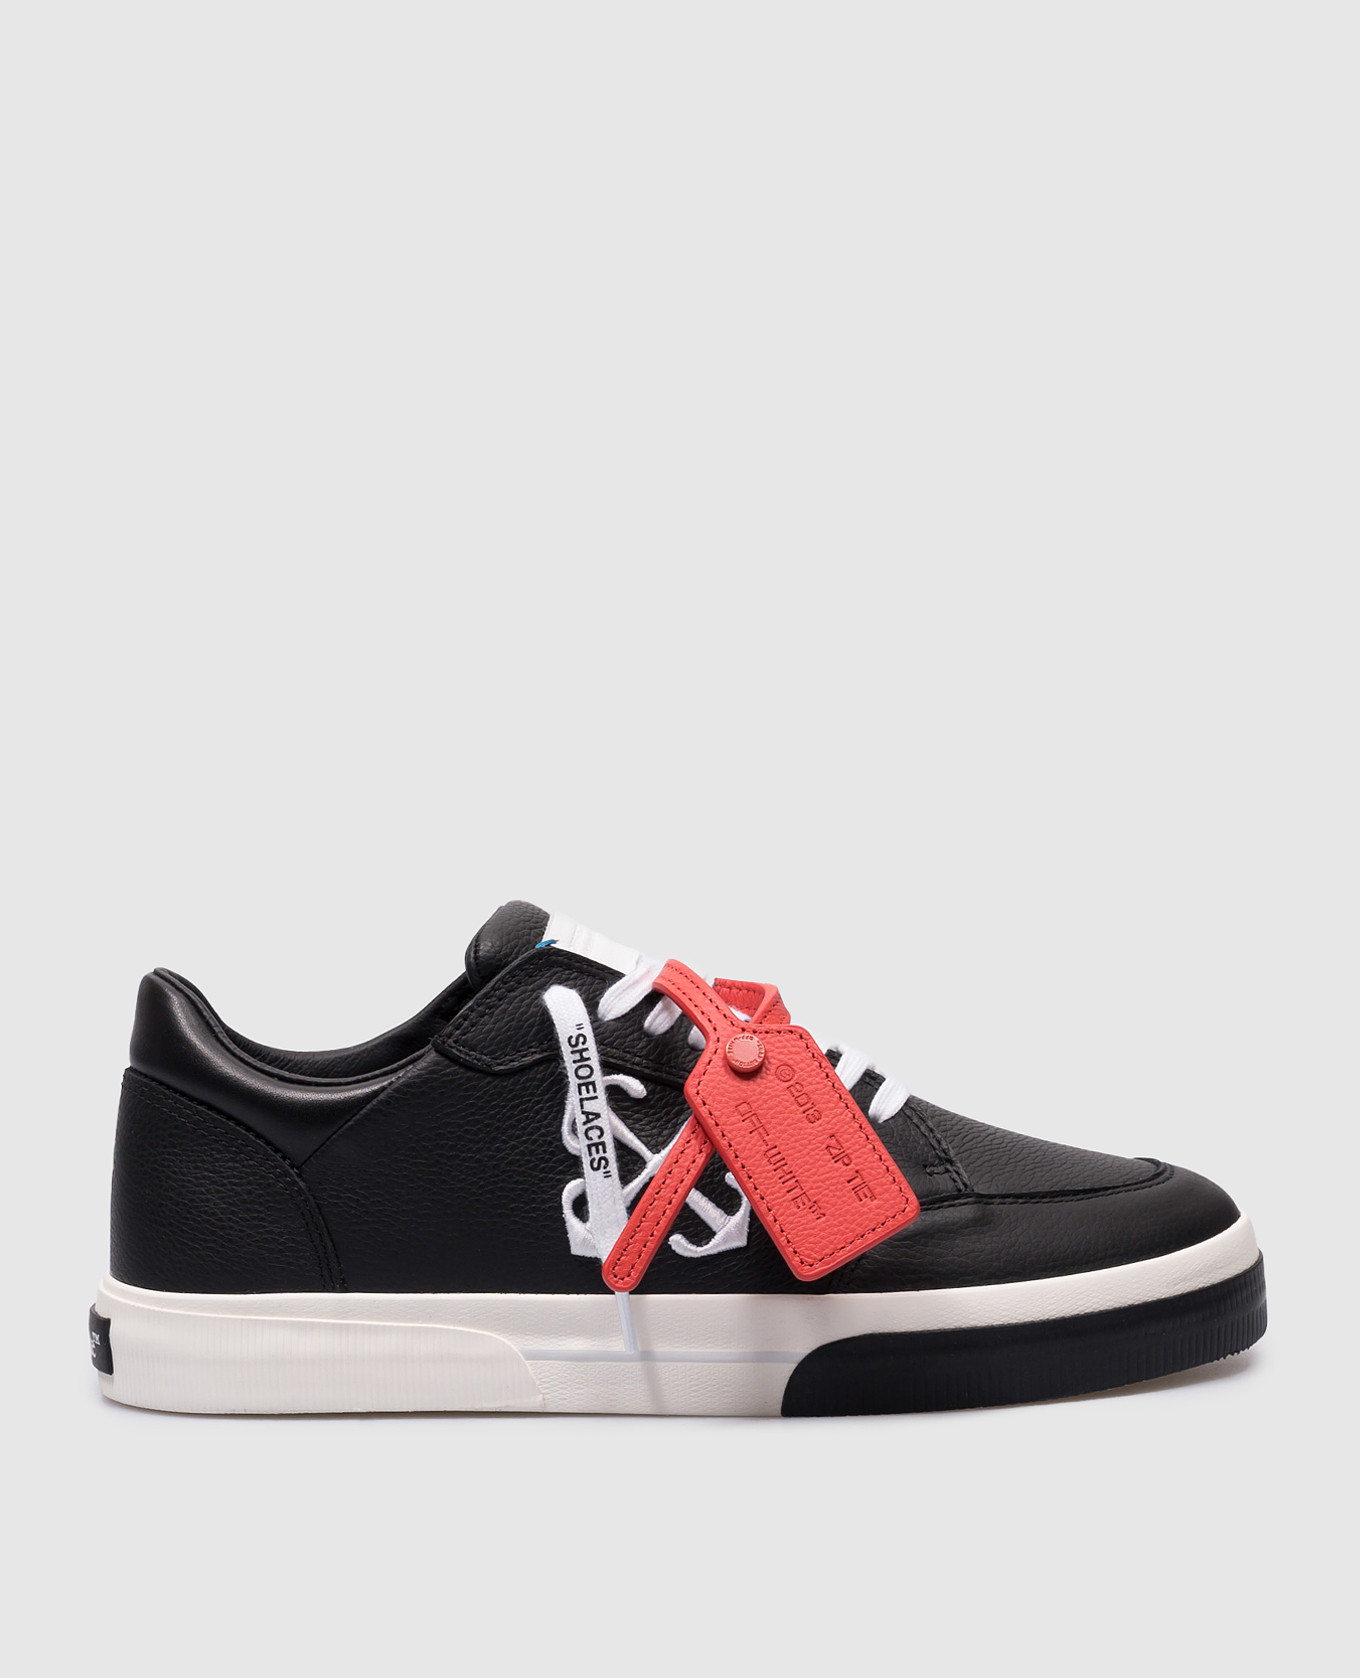 Black leather sneakers with Arrow logo embroidery